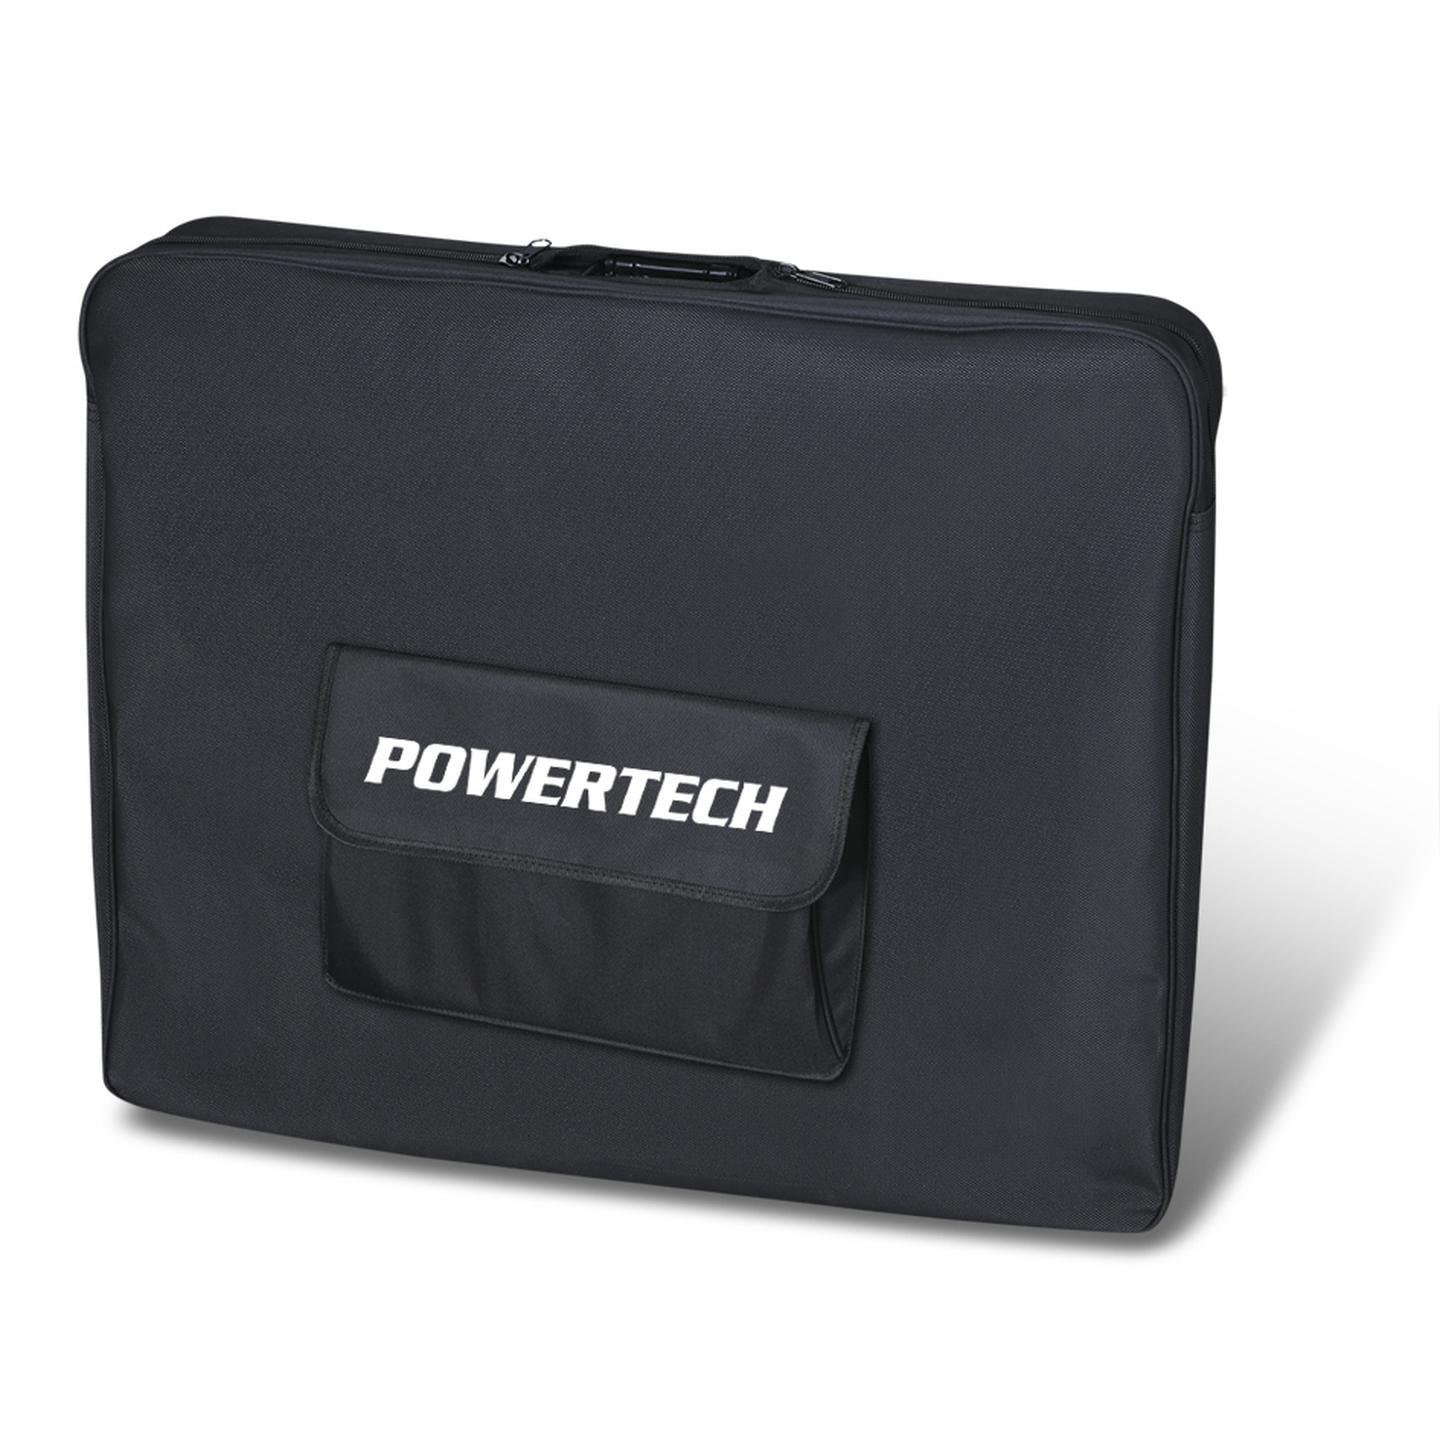 Powertech 12V 160W Folding Solar Panel with 5M Cable